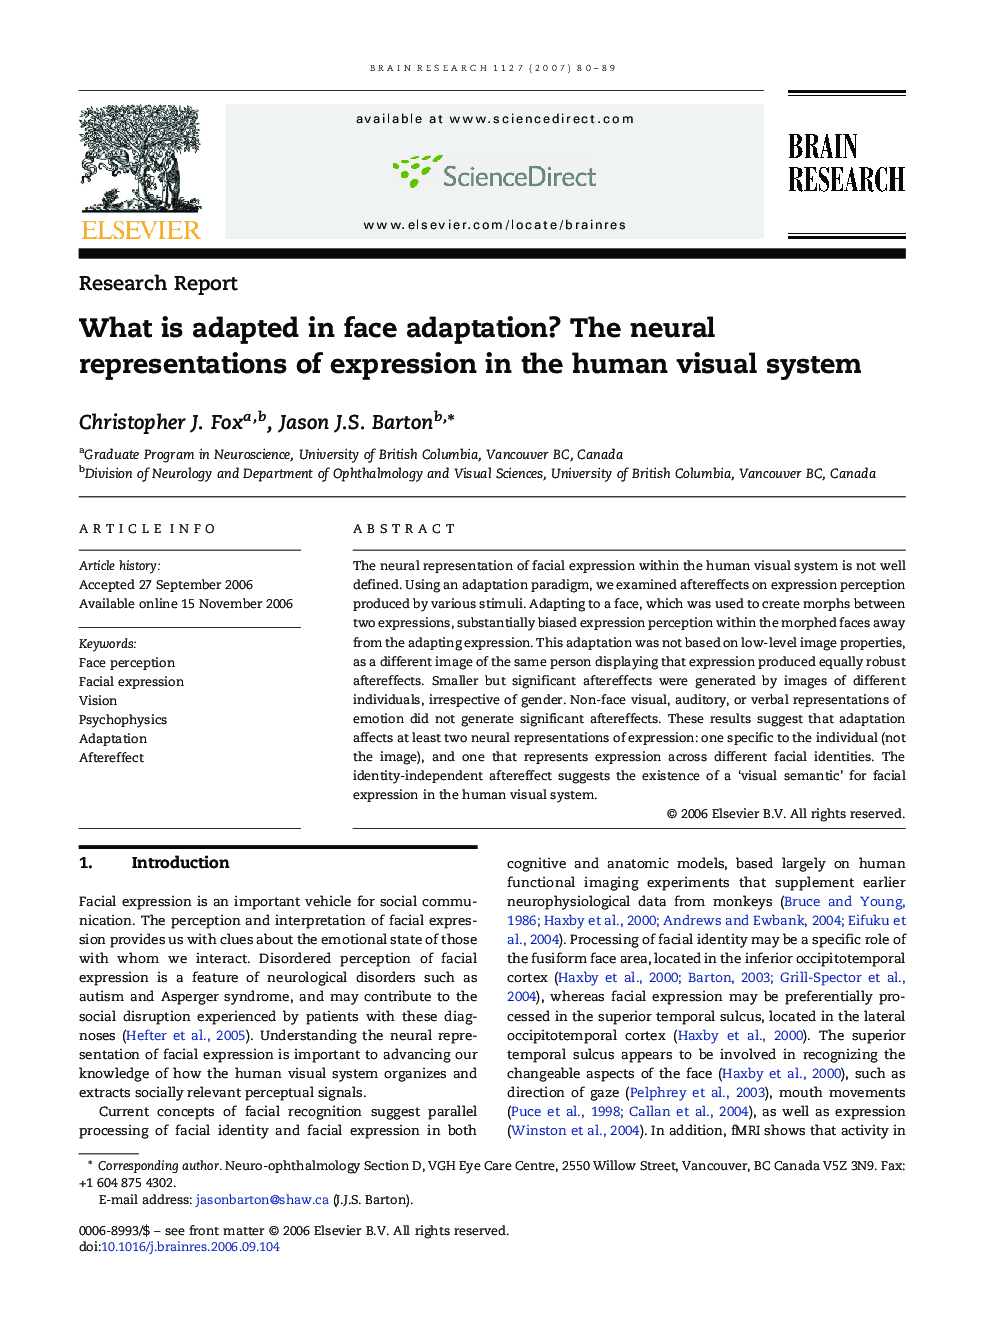 What is adapted in face adaptation? The neural representations of expression in the human visual system